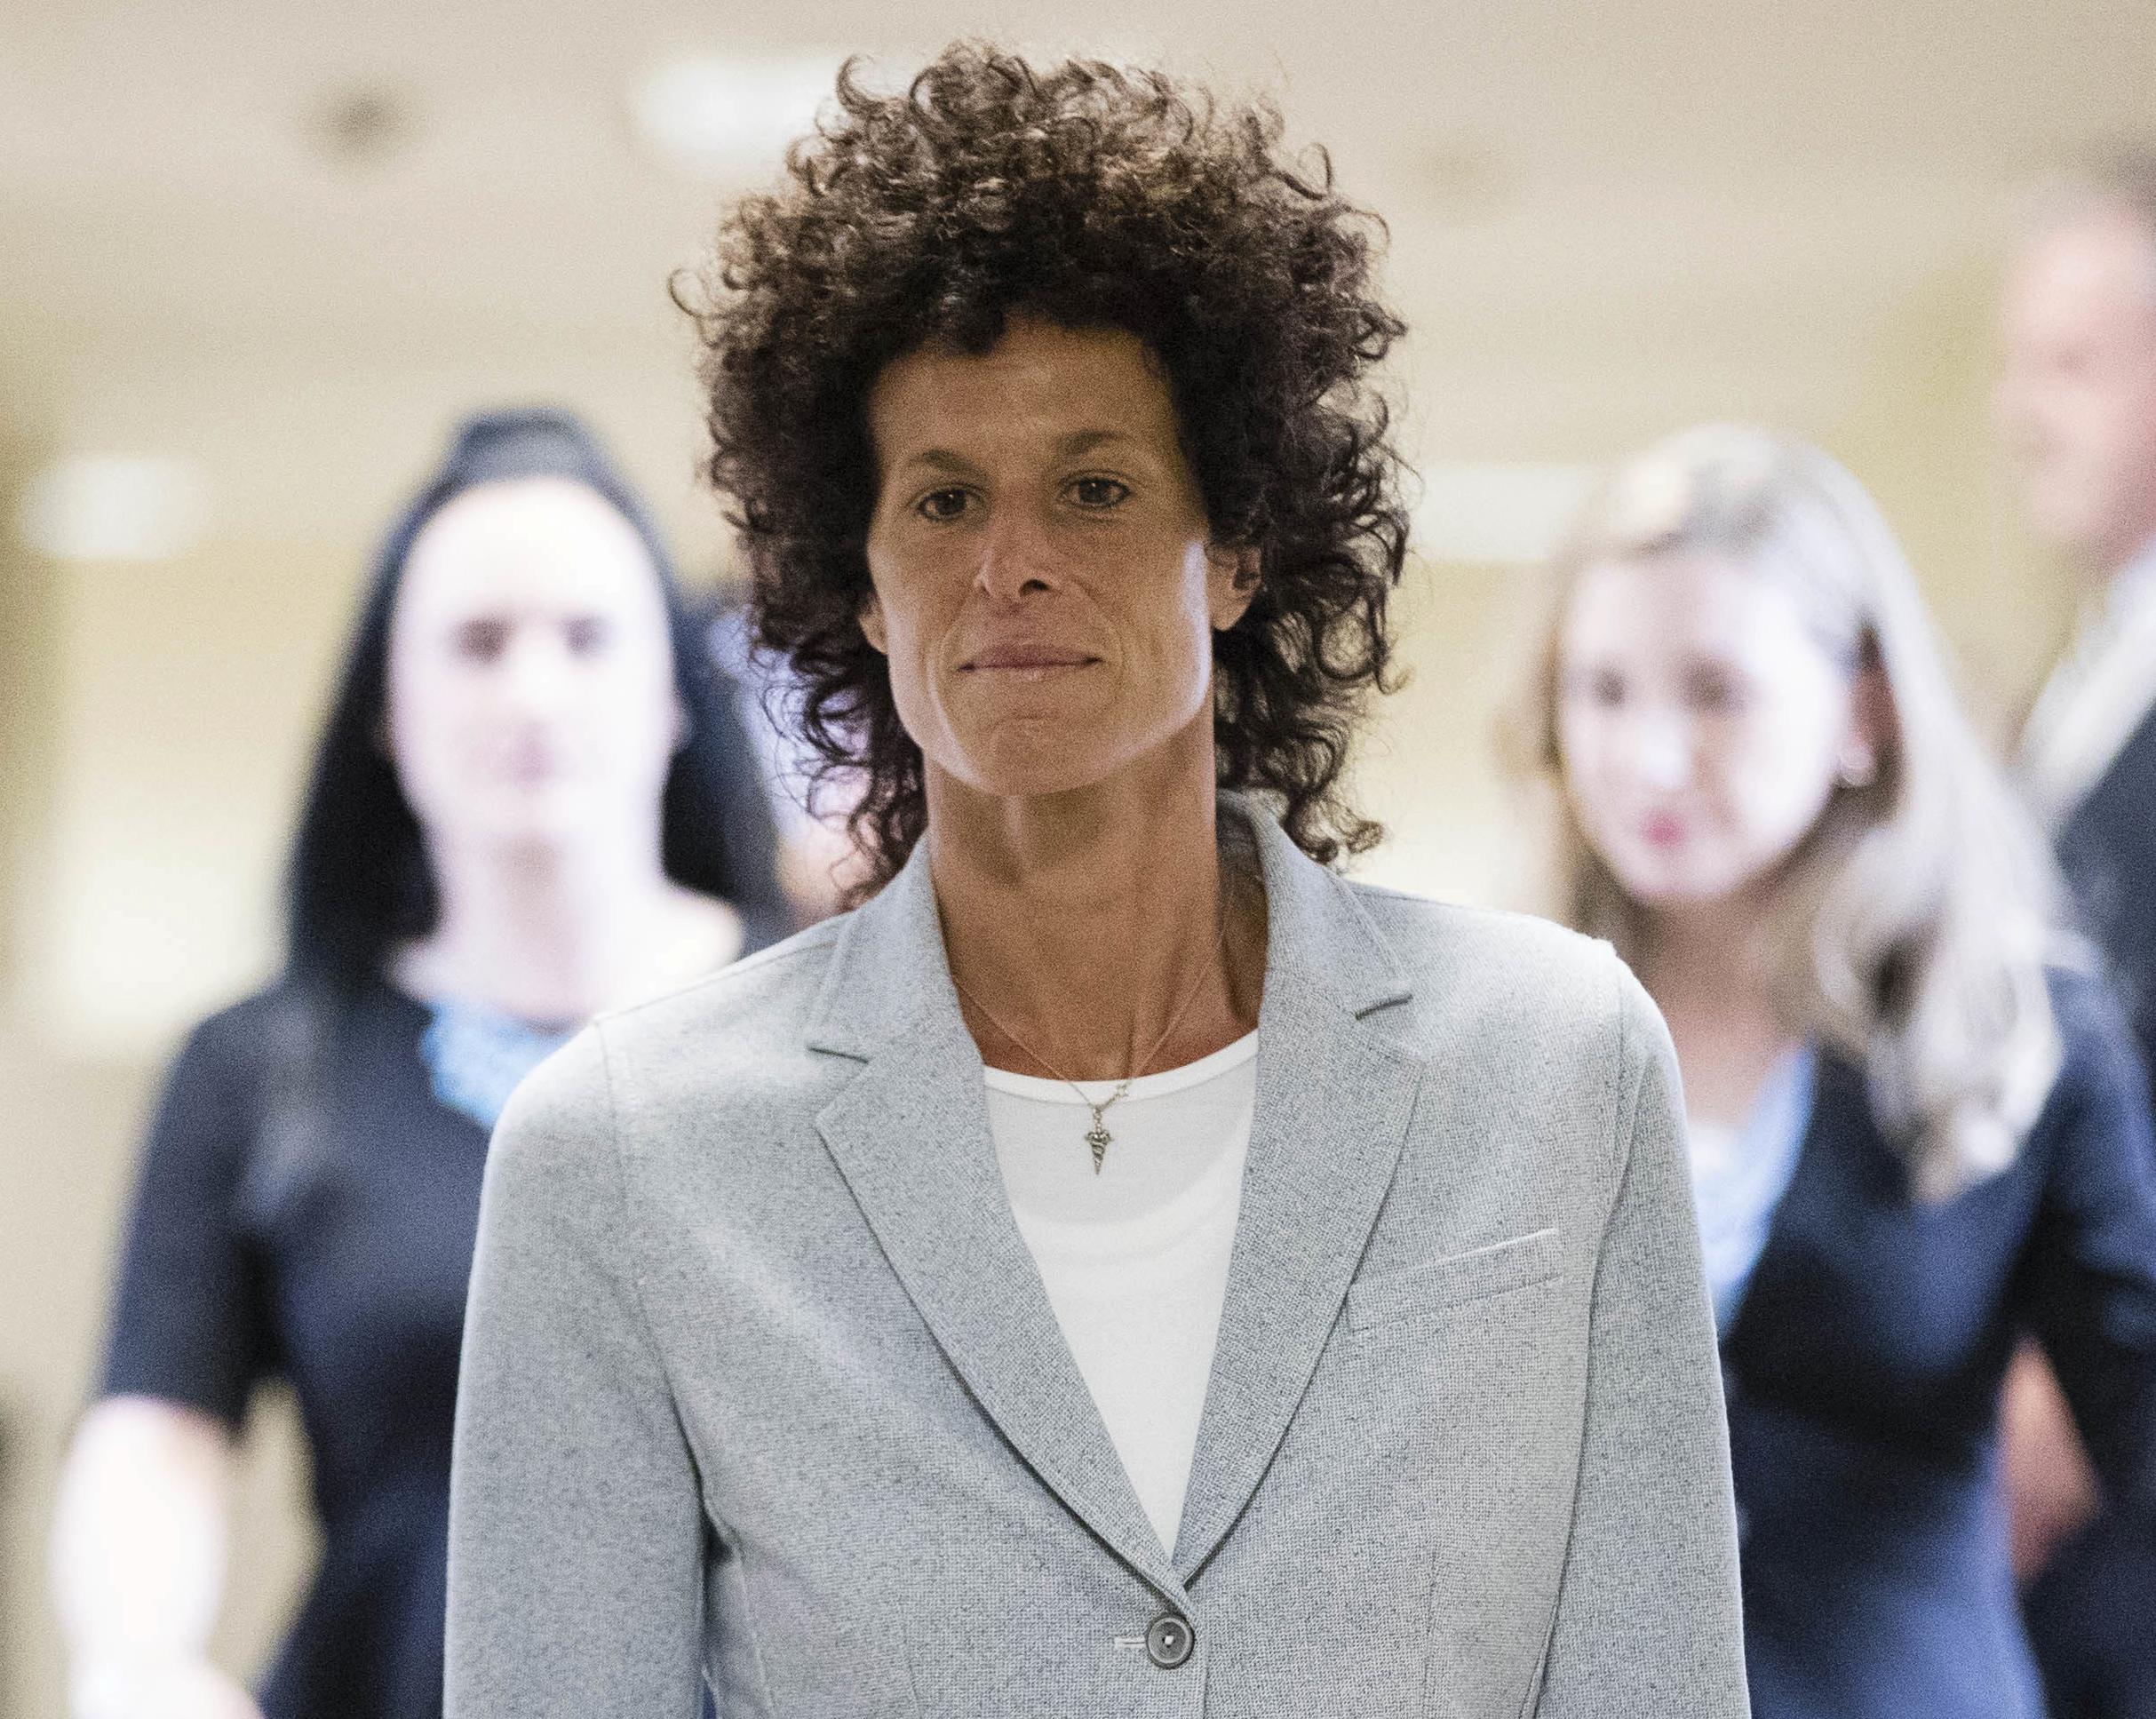 Andrea Constand walks to the courtroom during Bill Cosby's sexual assault trial at the Montgomery County Courthouse in Norristown, Pennsylvania